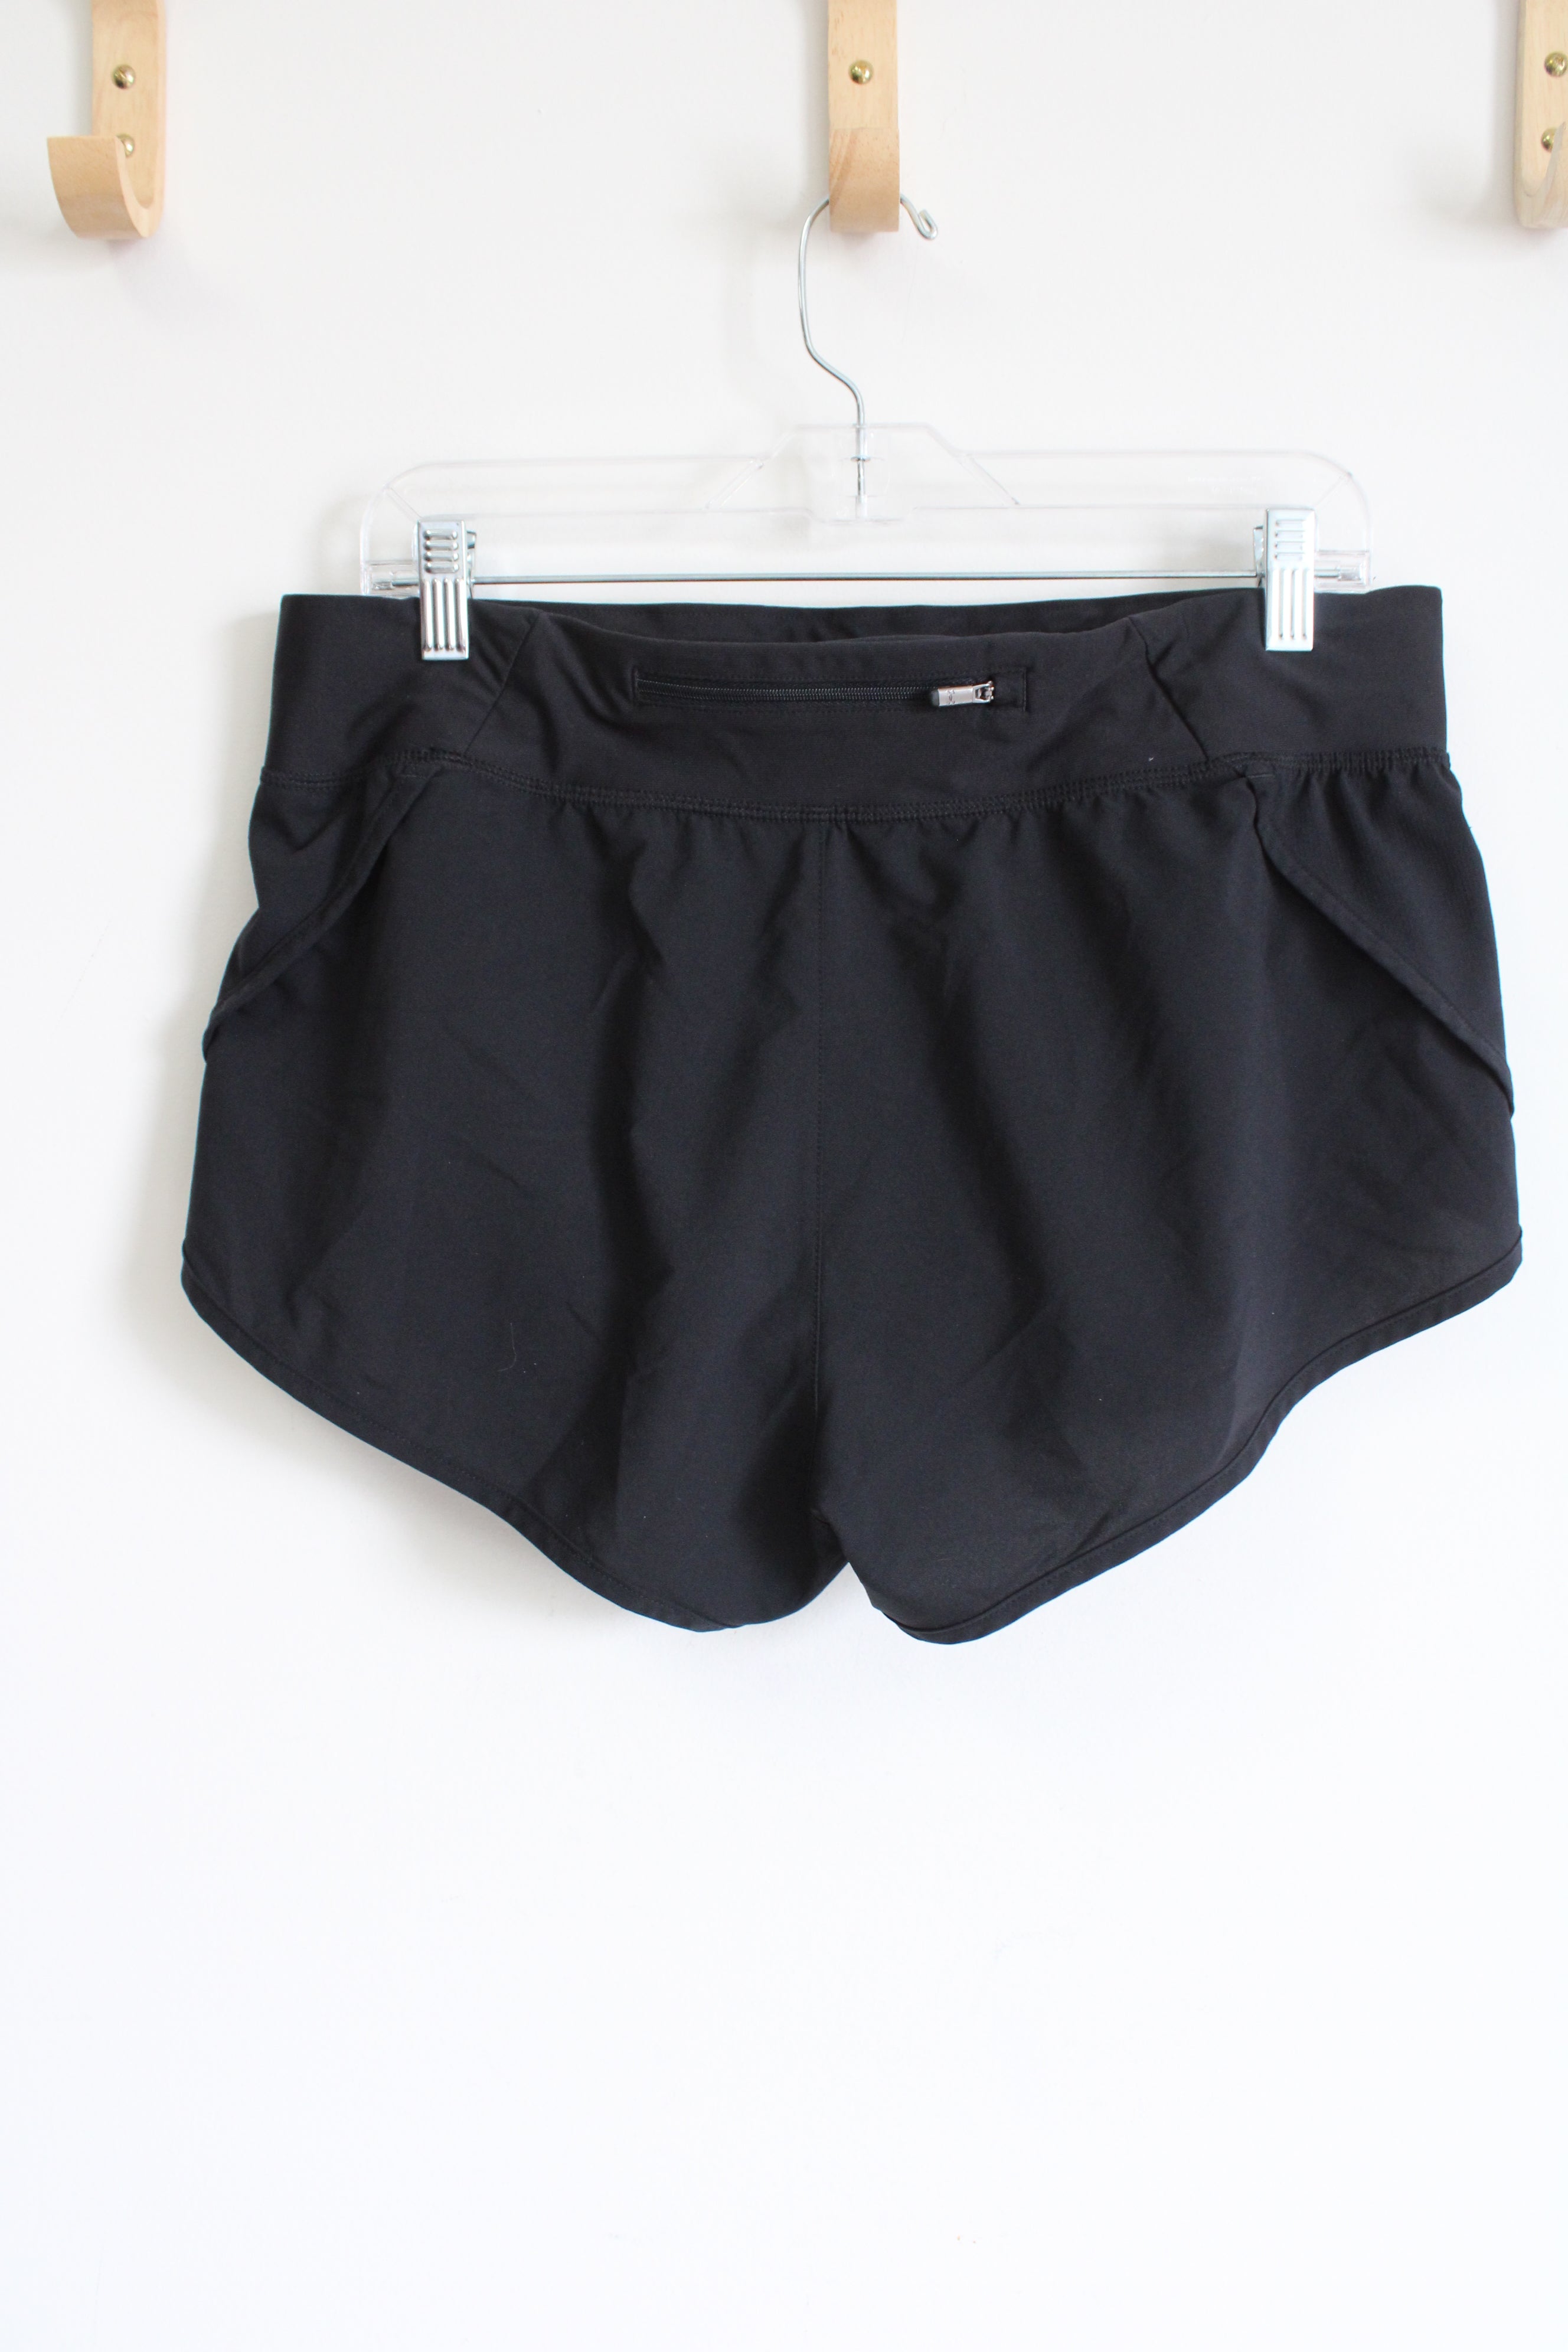 Under Armour Fitted Black Shorts | L